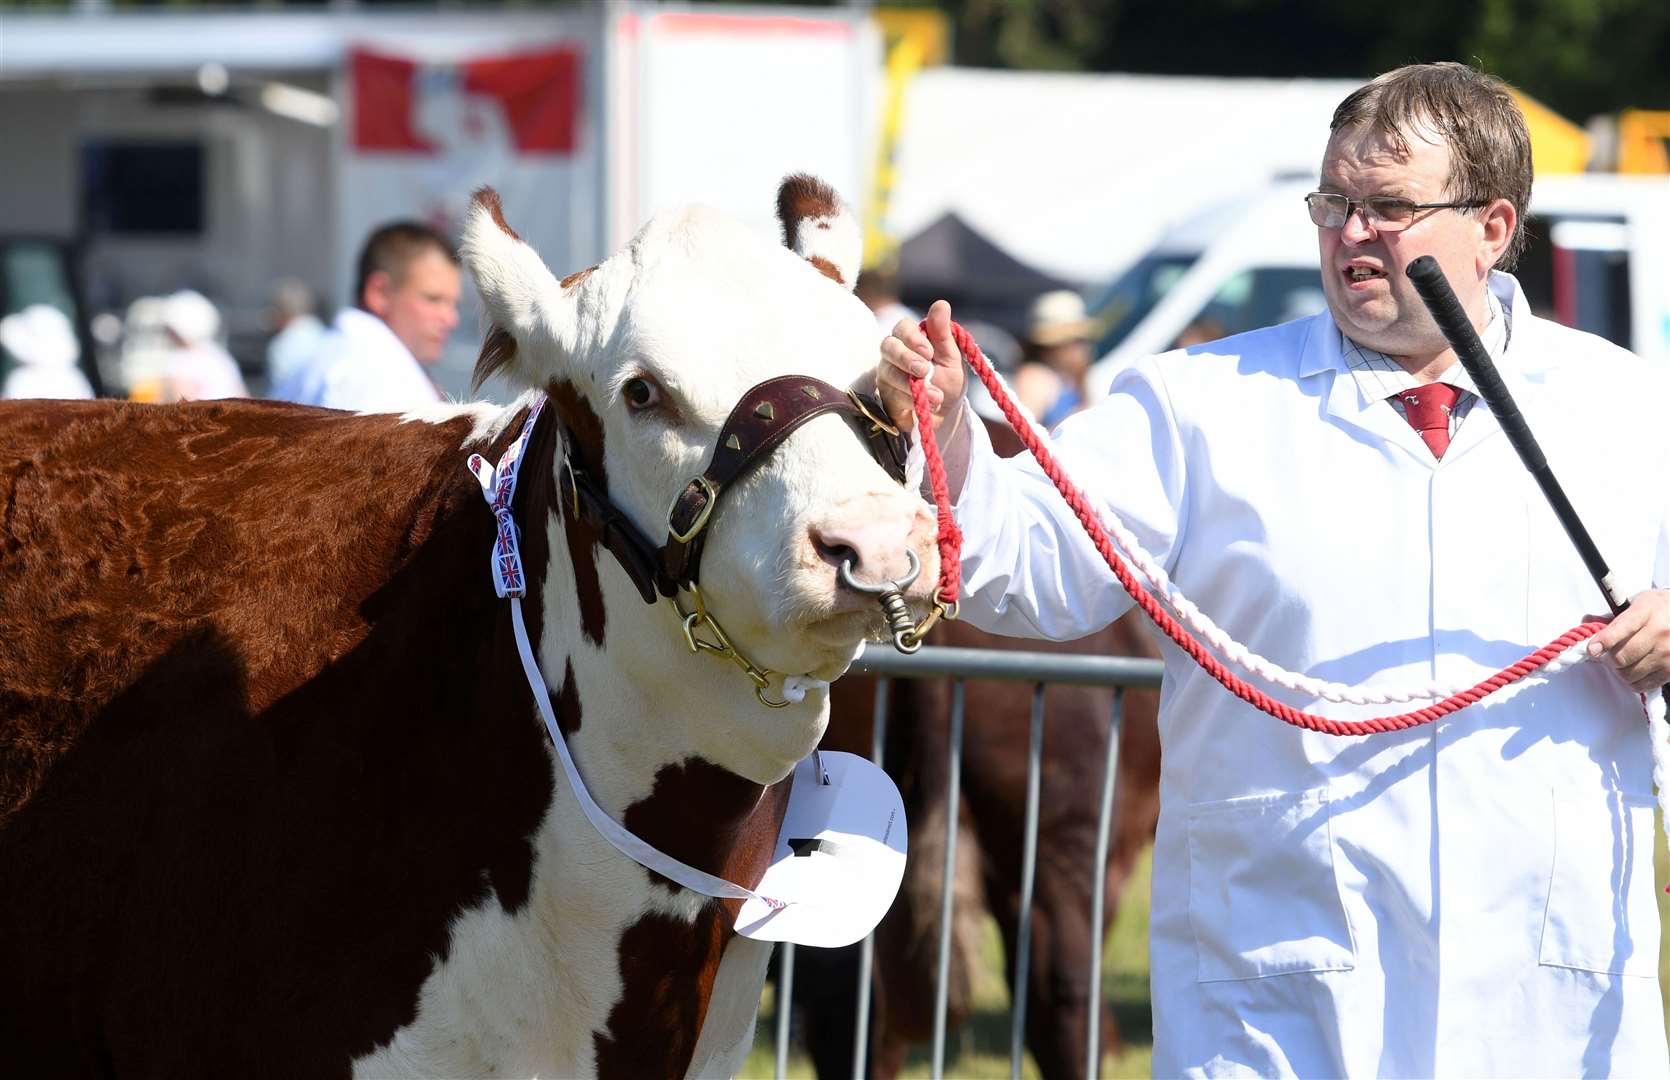 The Kent Show runs over three days in July and organisers are confident it can avoid travel problems. Picture: Barry Goodwin